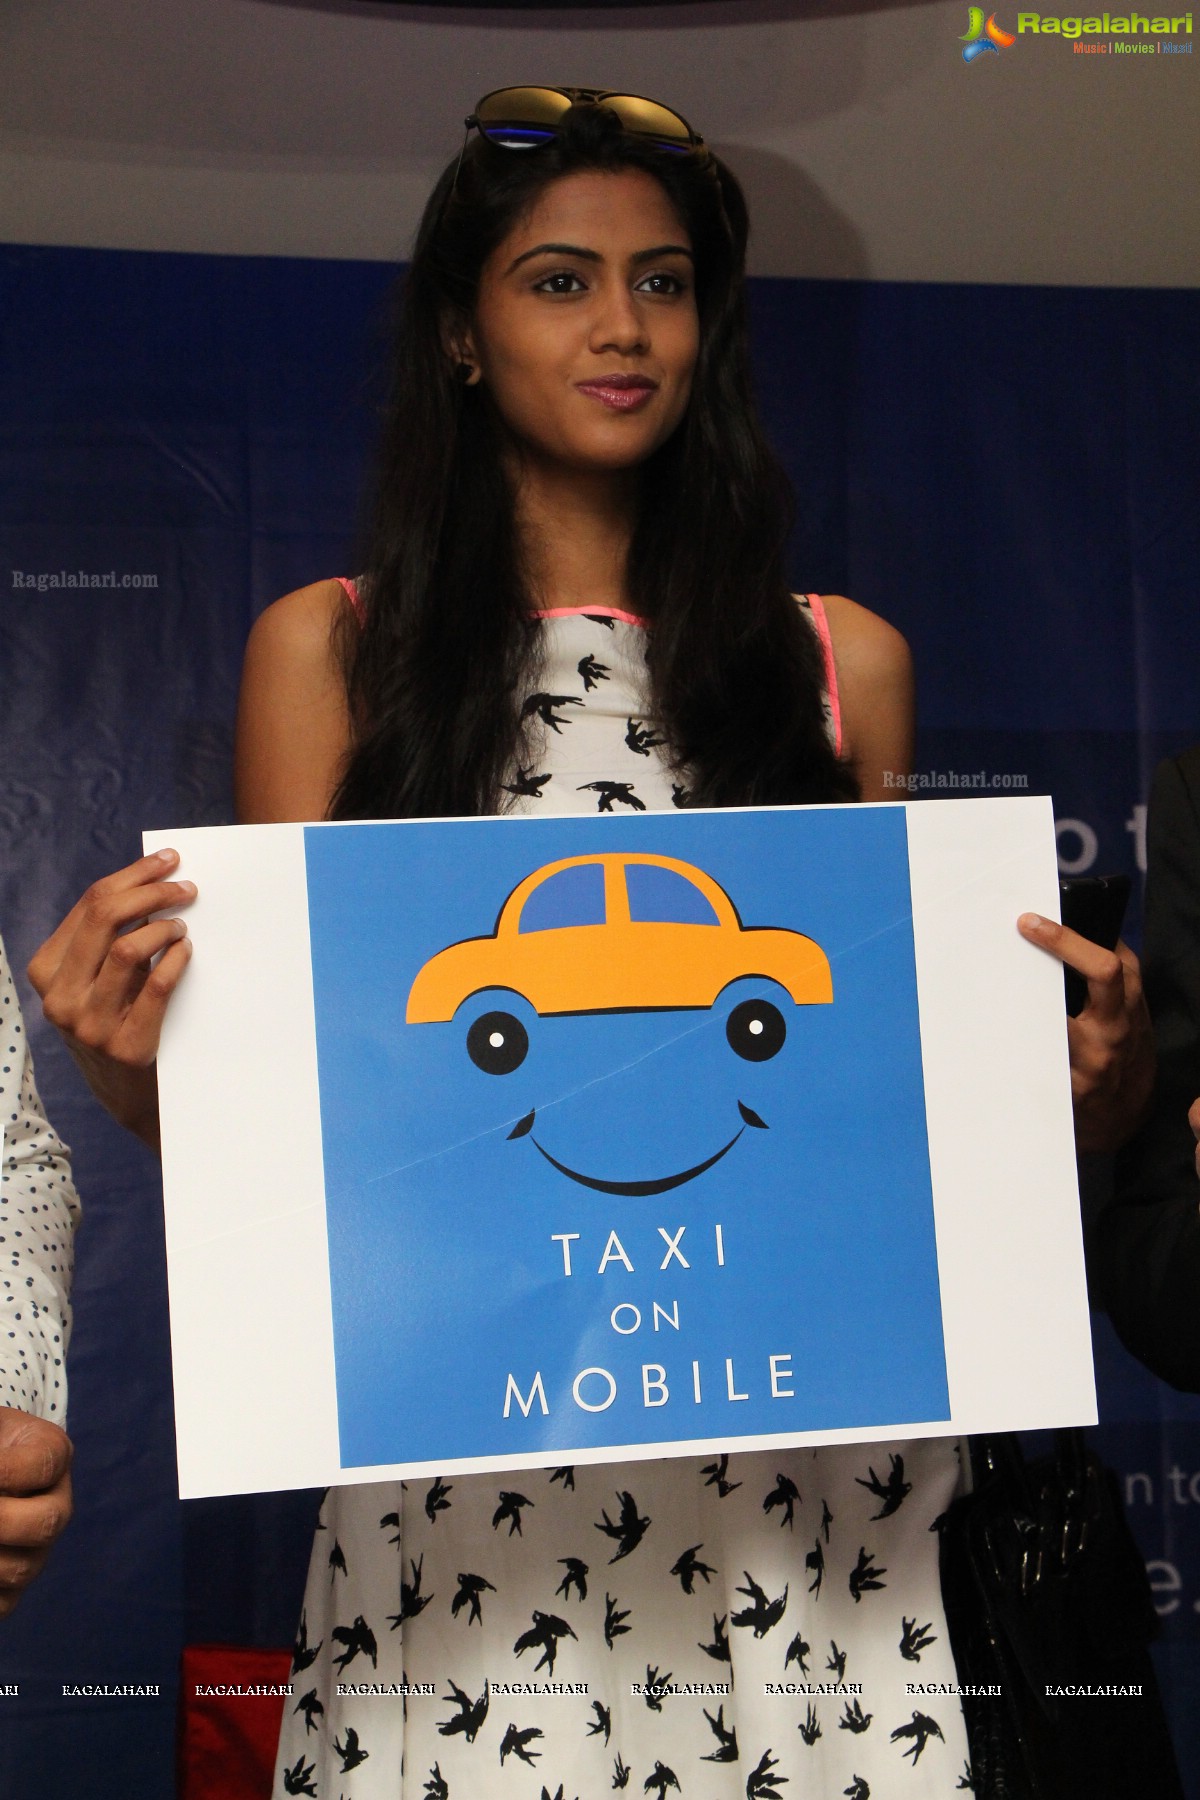 Taxi on Mobile launches Empty Taxi Service in Hyderabad